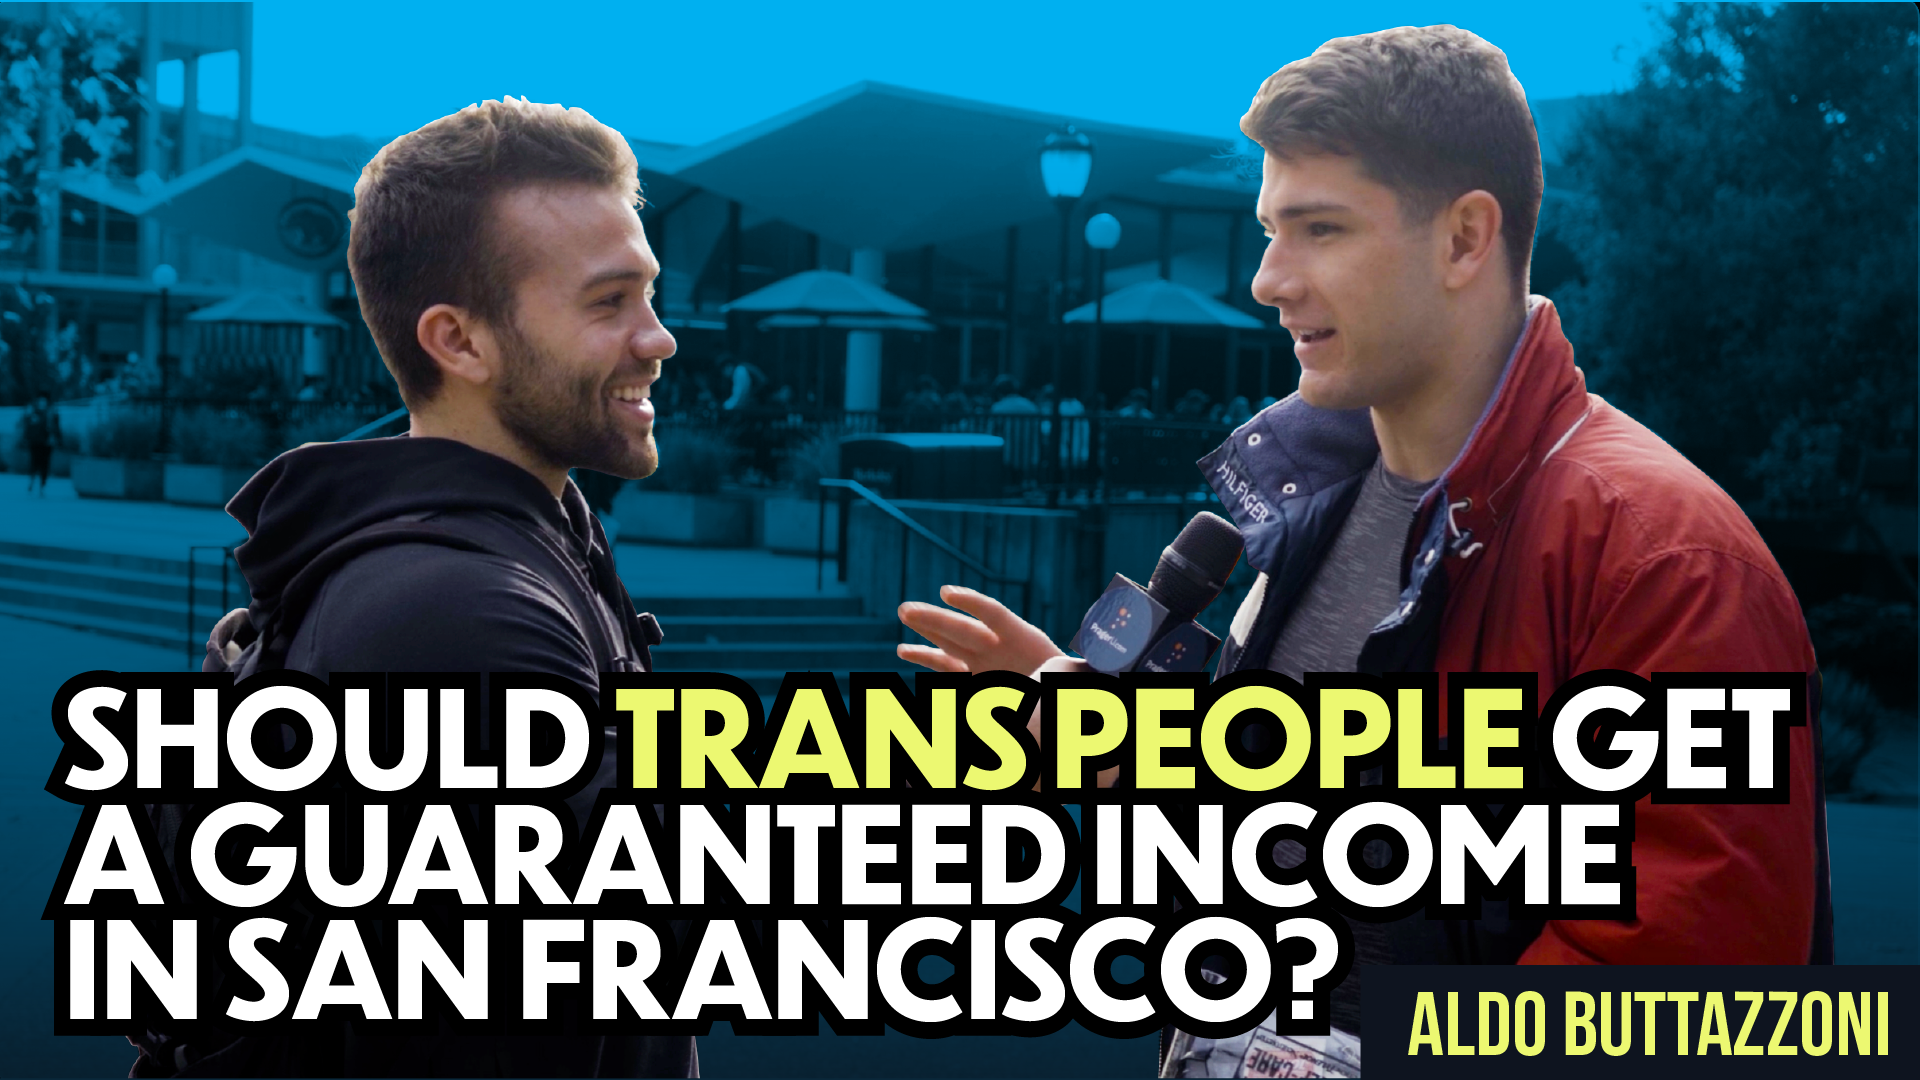 Should San Francisco Guarantee Income for Trans People?